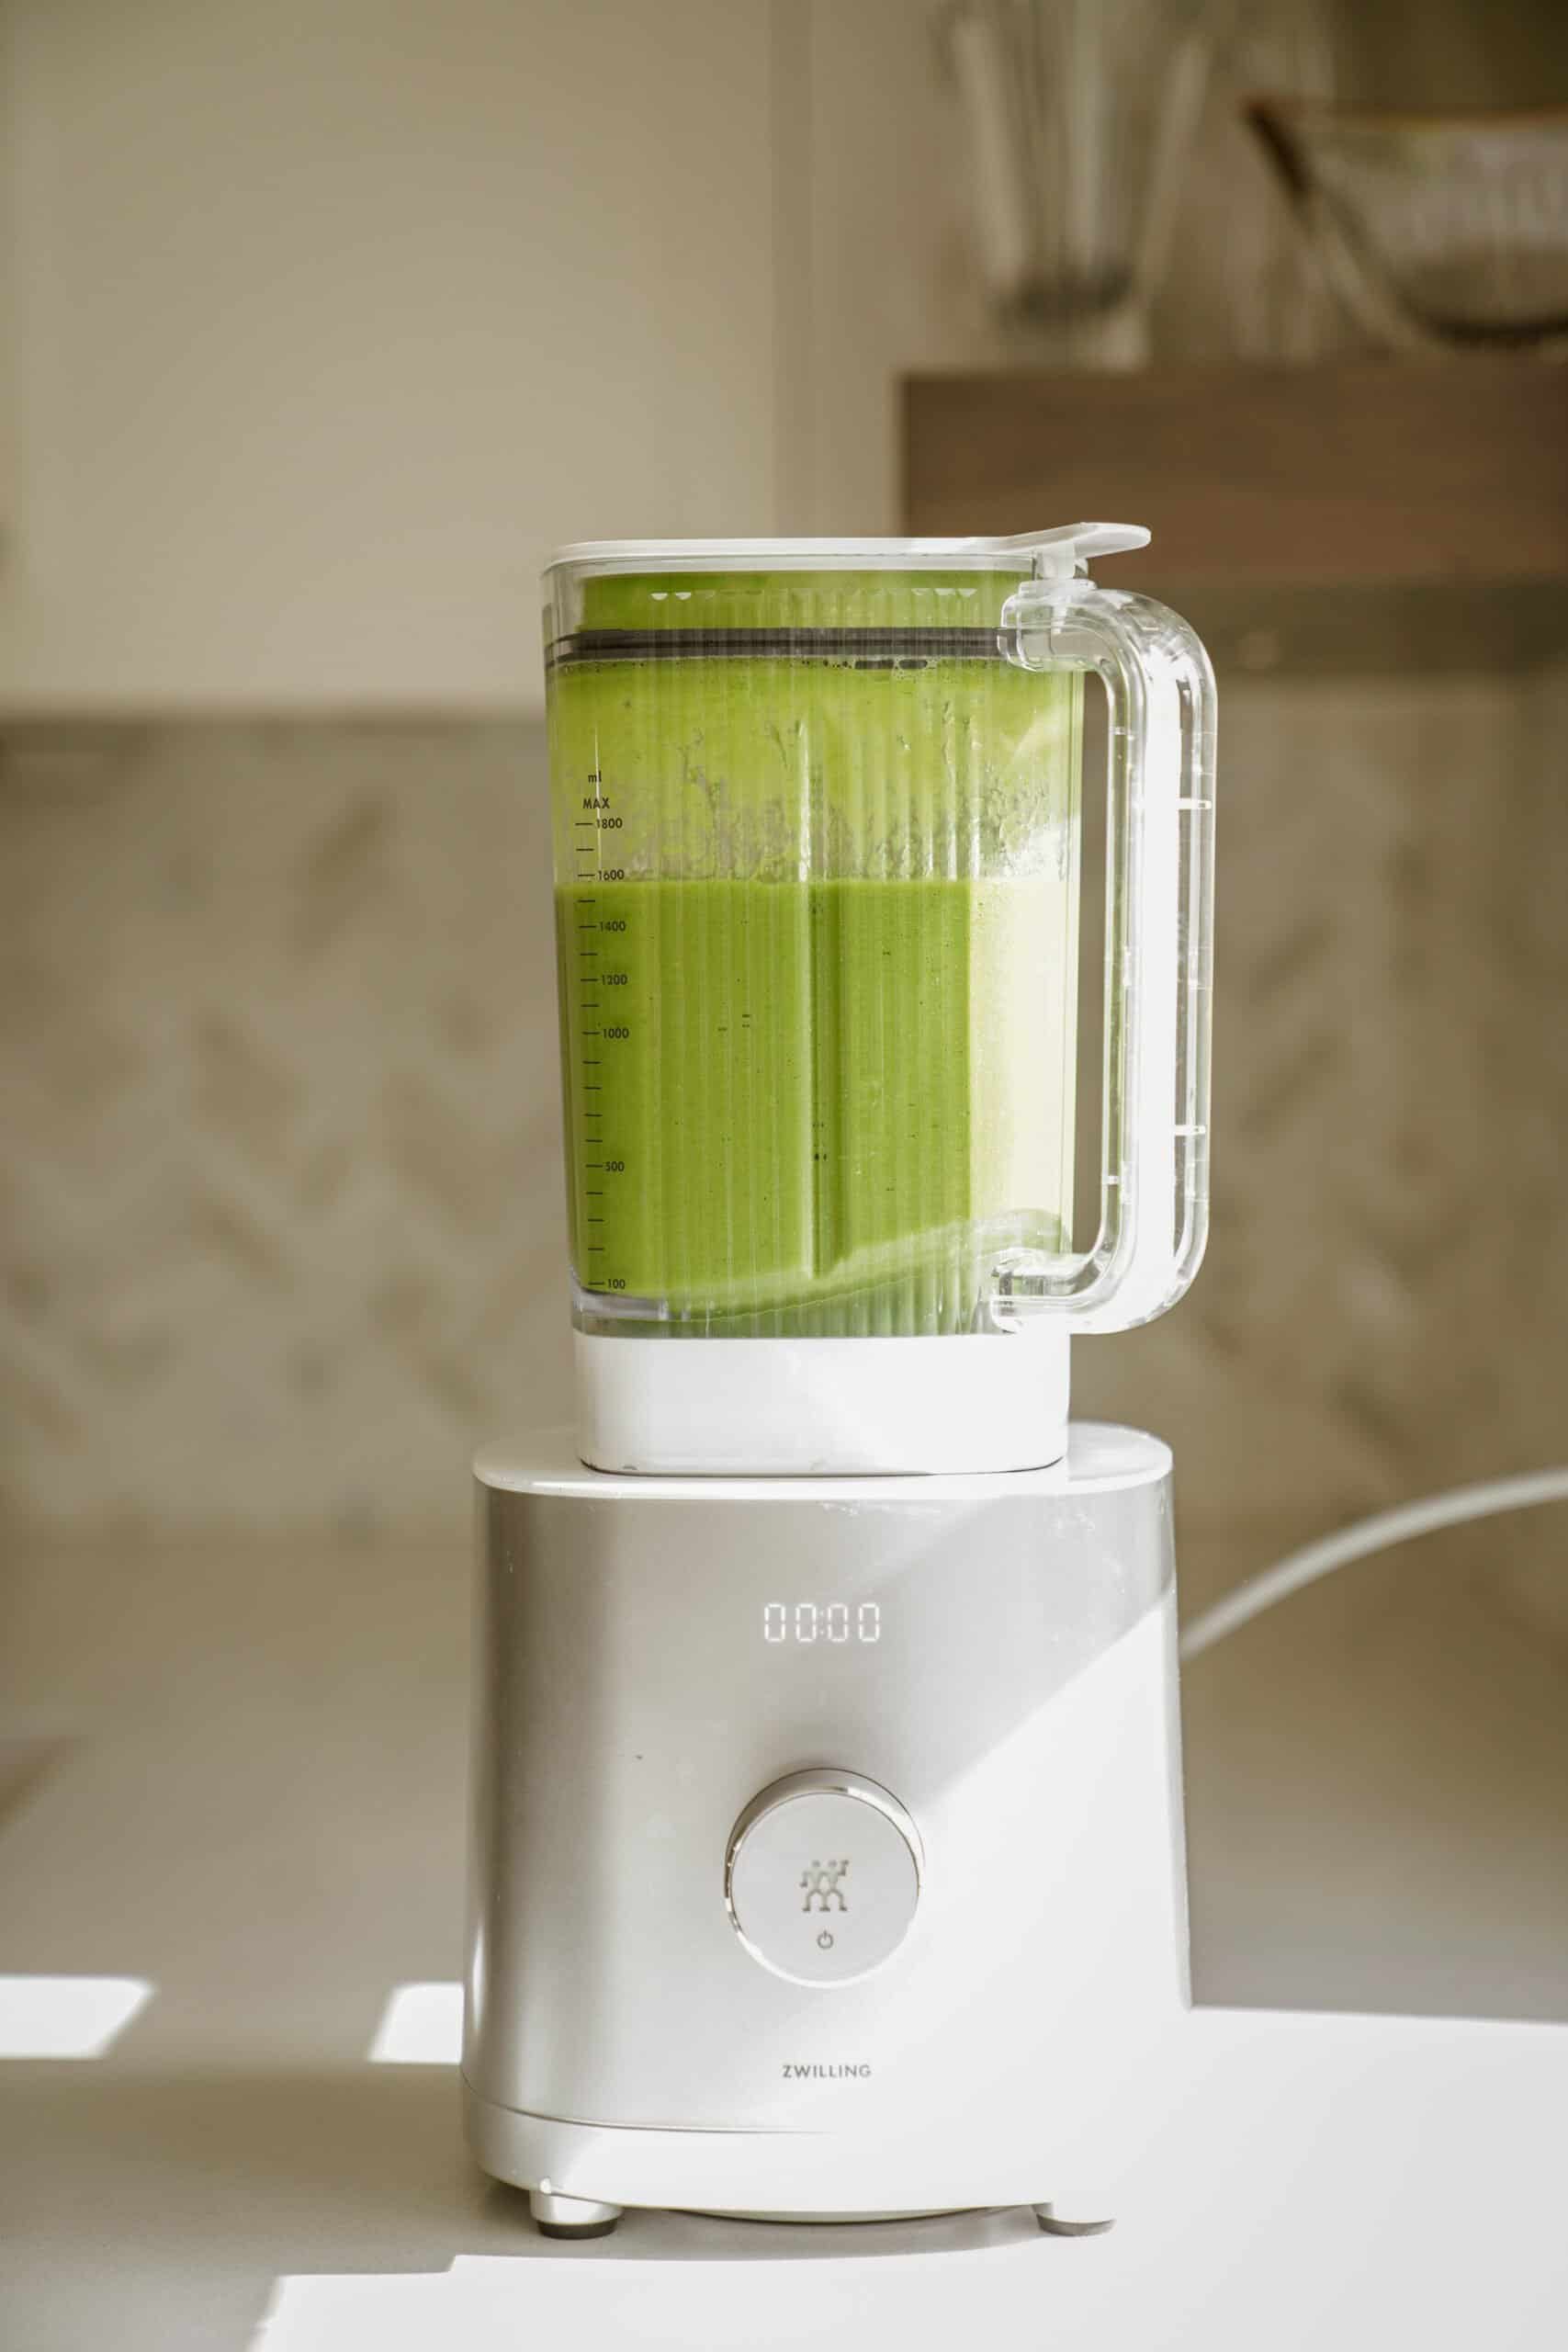 https://www.foodbymaria.com/wp-content/uploads/2022/05/GREEN-SMOOTHIE-3-1-scaled.jpg